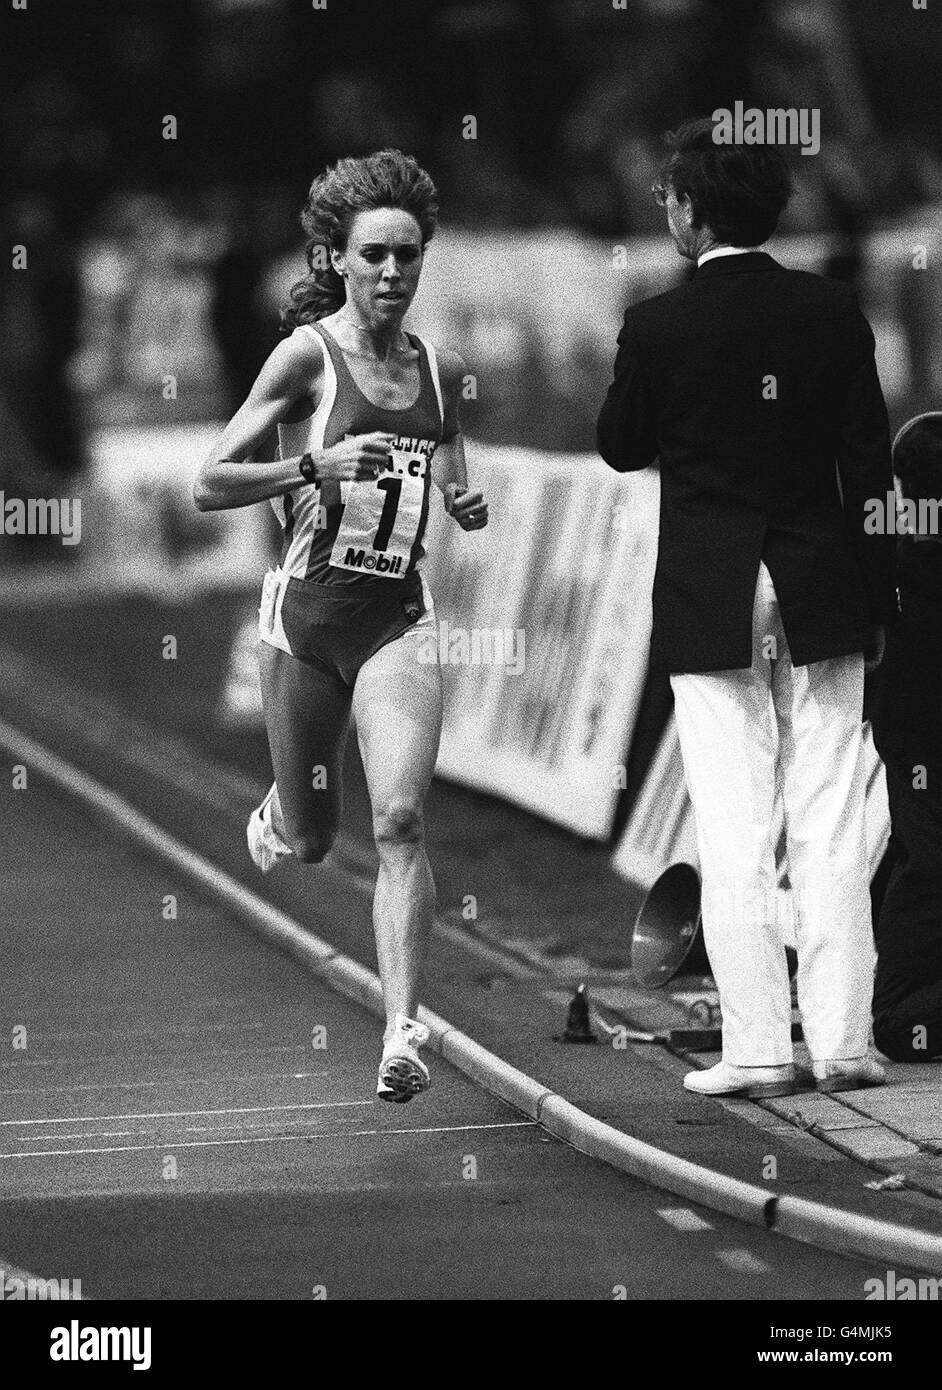 Mary Slaney at Crystal Palace, London, competing in the IAC Grand Prix Athletics meeting. In the Mile event, her attempt faded at the halfway point, but Slaney still came home in a UK All-comers record of 4 mins 19.59 secs. * 15 secs ahead of Commonwealth champion Christina Boxer. Stock Photo